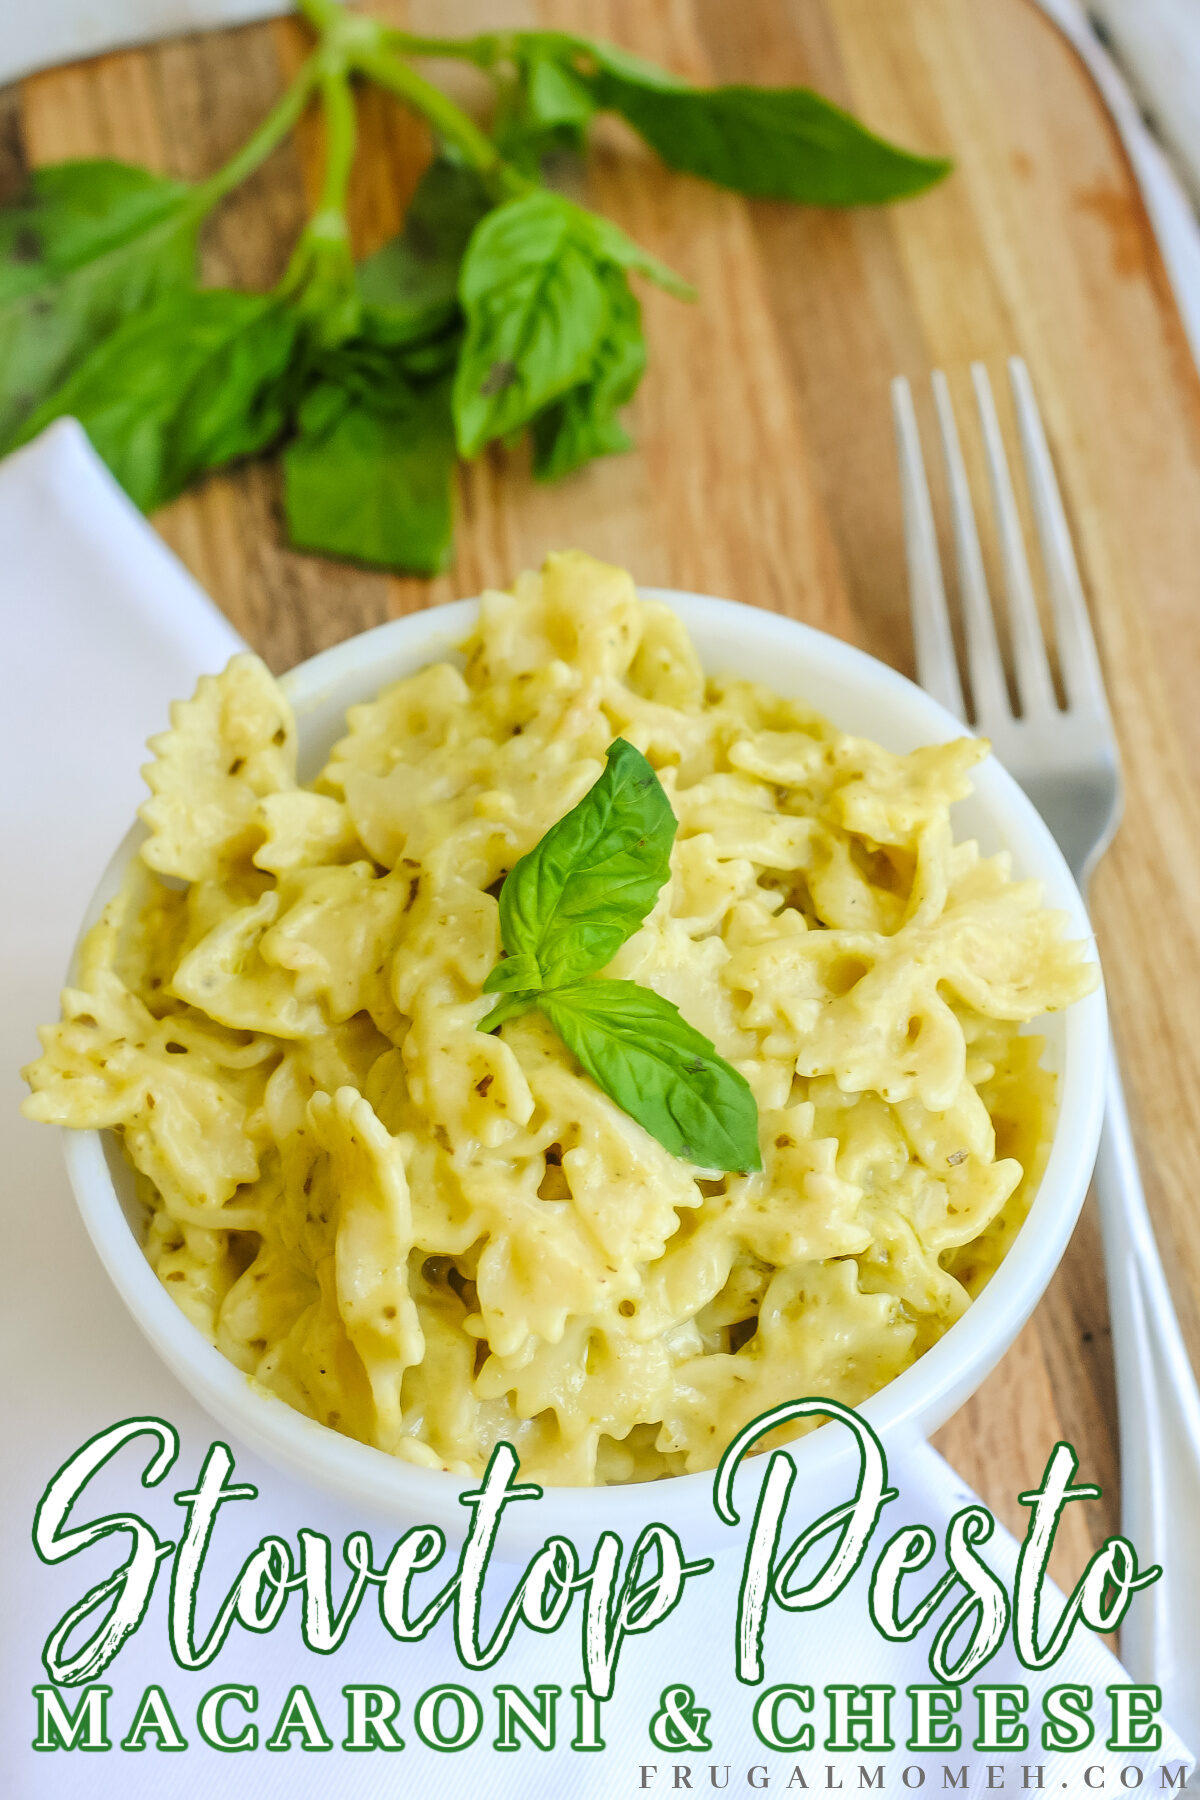 This stovetop pesto mac and cheese recipe is quick, simple, creamy, and so flavorful! A perfect weeknight meal filled with cheese and pesto.